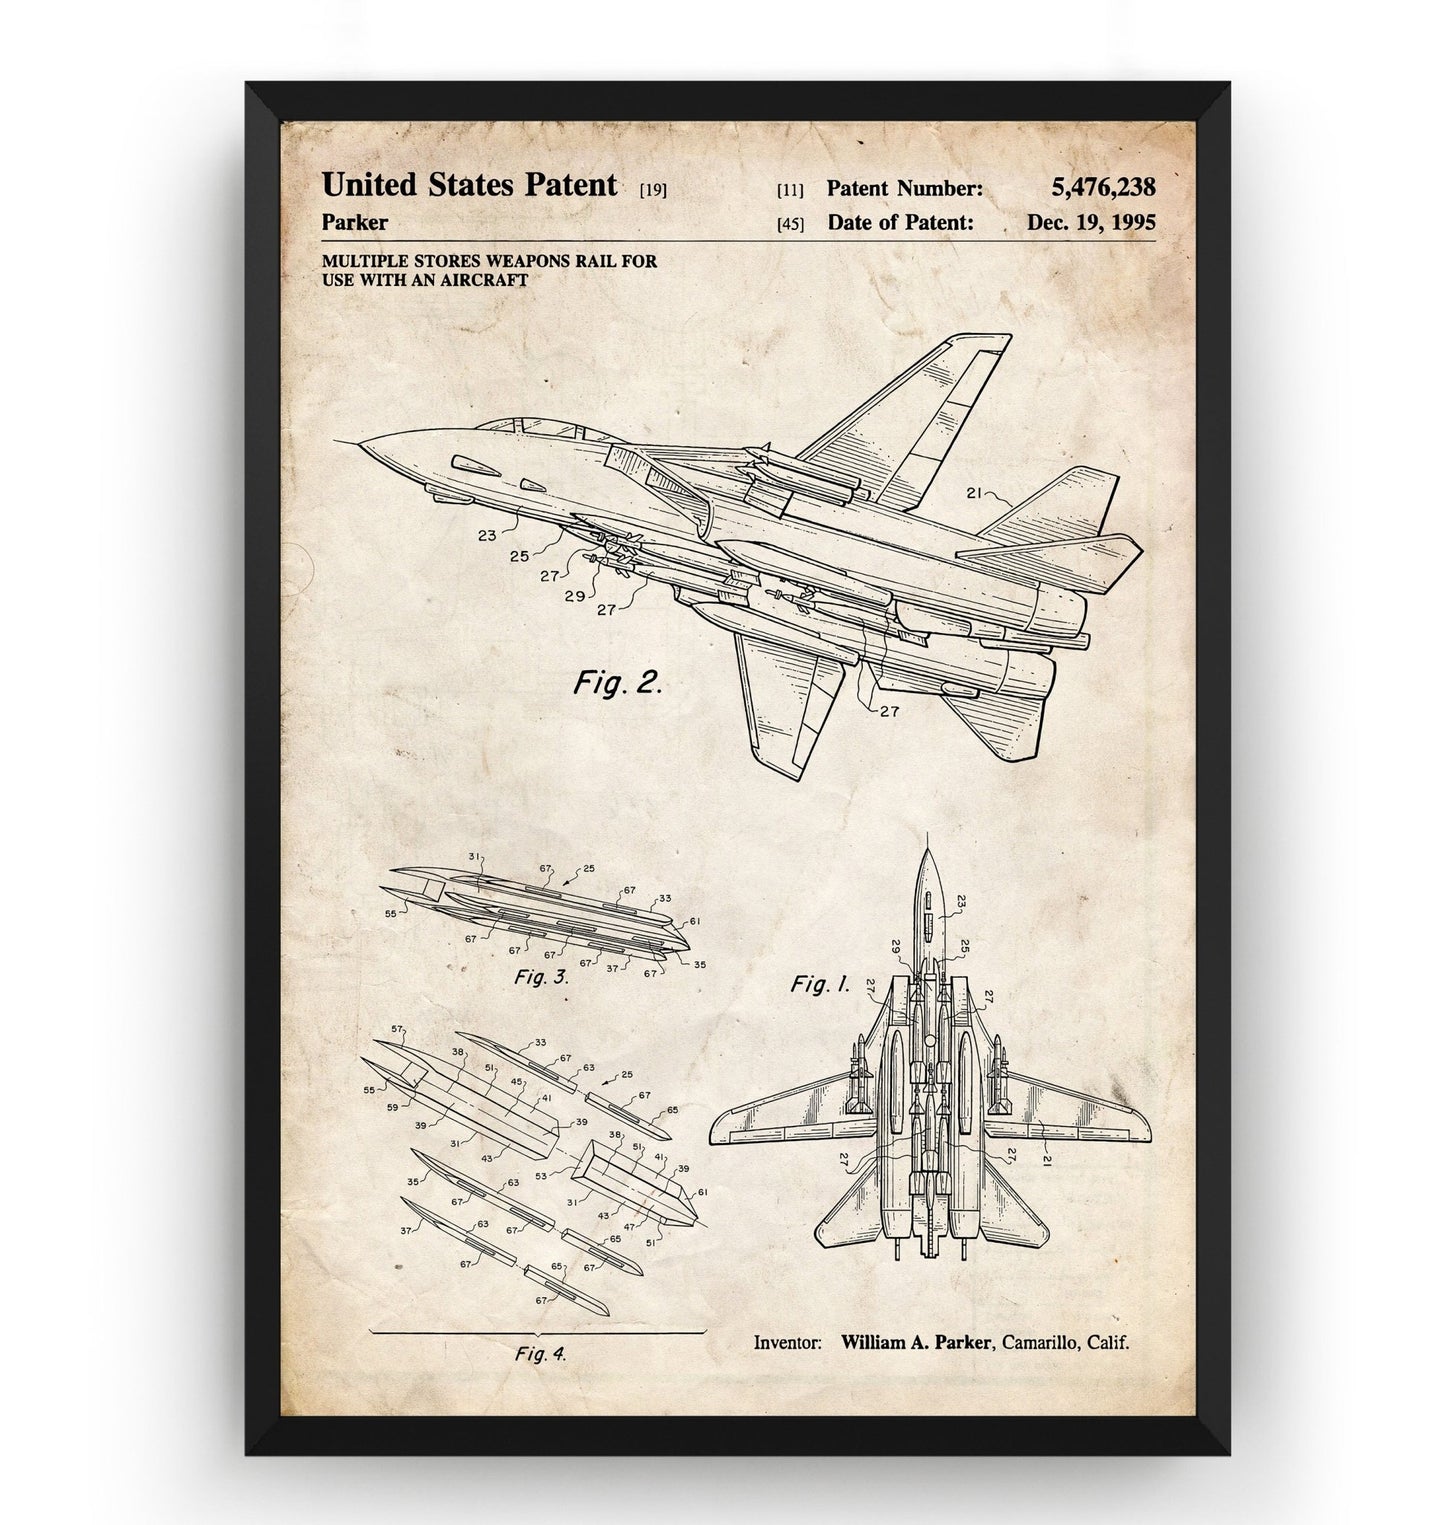 Aircraft Weapons Rail 1955 Patent Print - Magic Posters